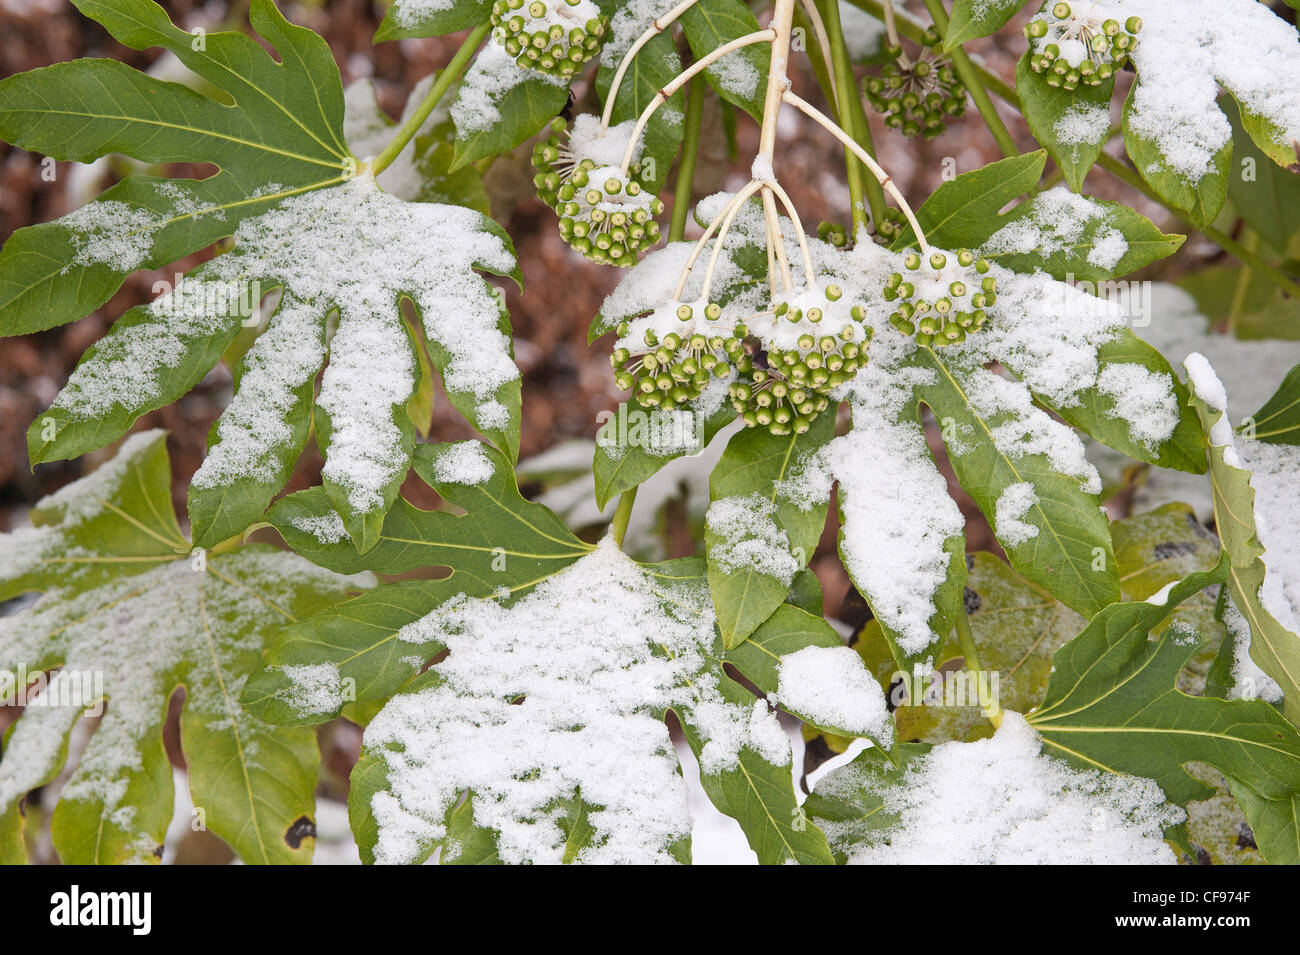 Fatsia Japonica evergreen shrub covered with snow and consequently protecting itself by semi wilting Stock Photo